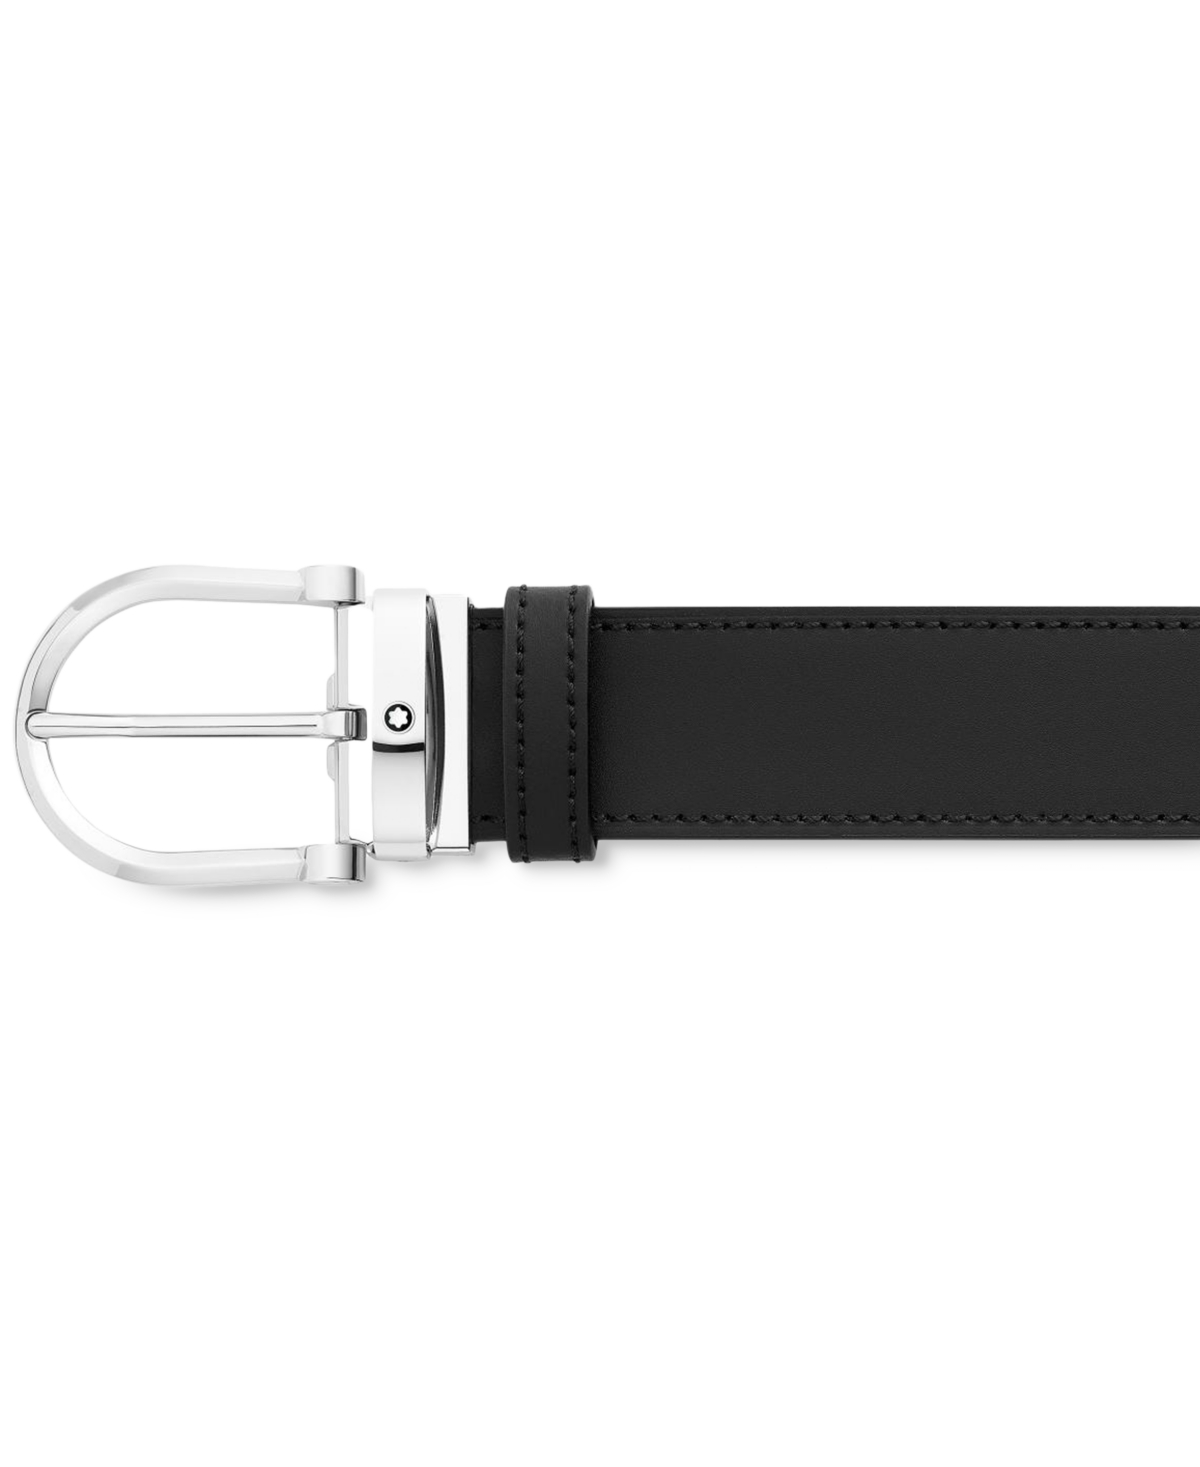 Montblanc Horseshoe Buckle Reversible Leather Belt In Black Brown